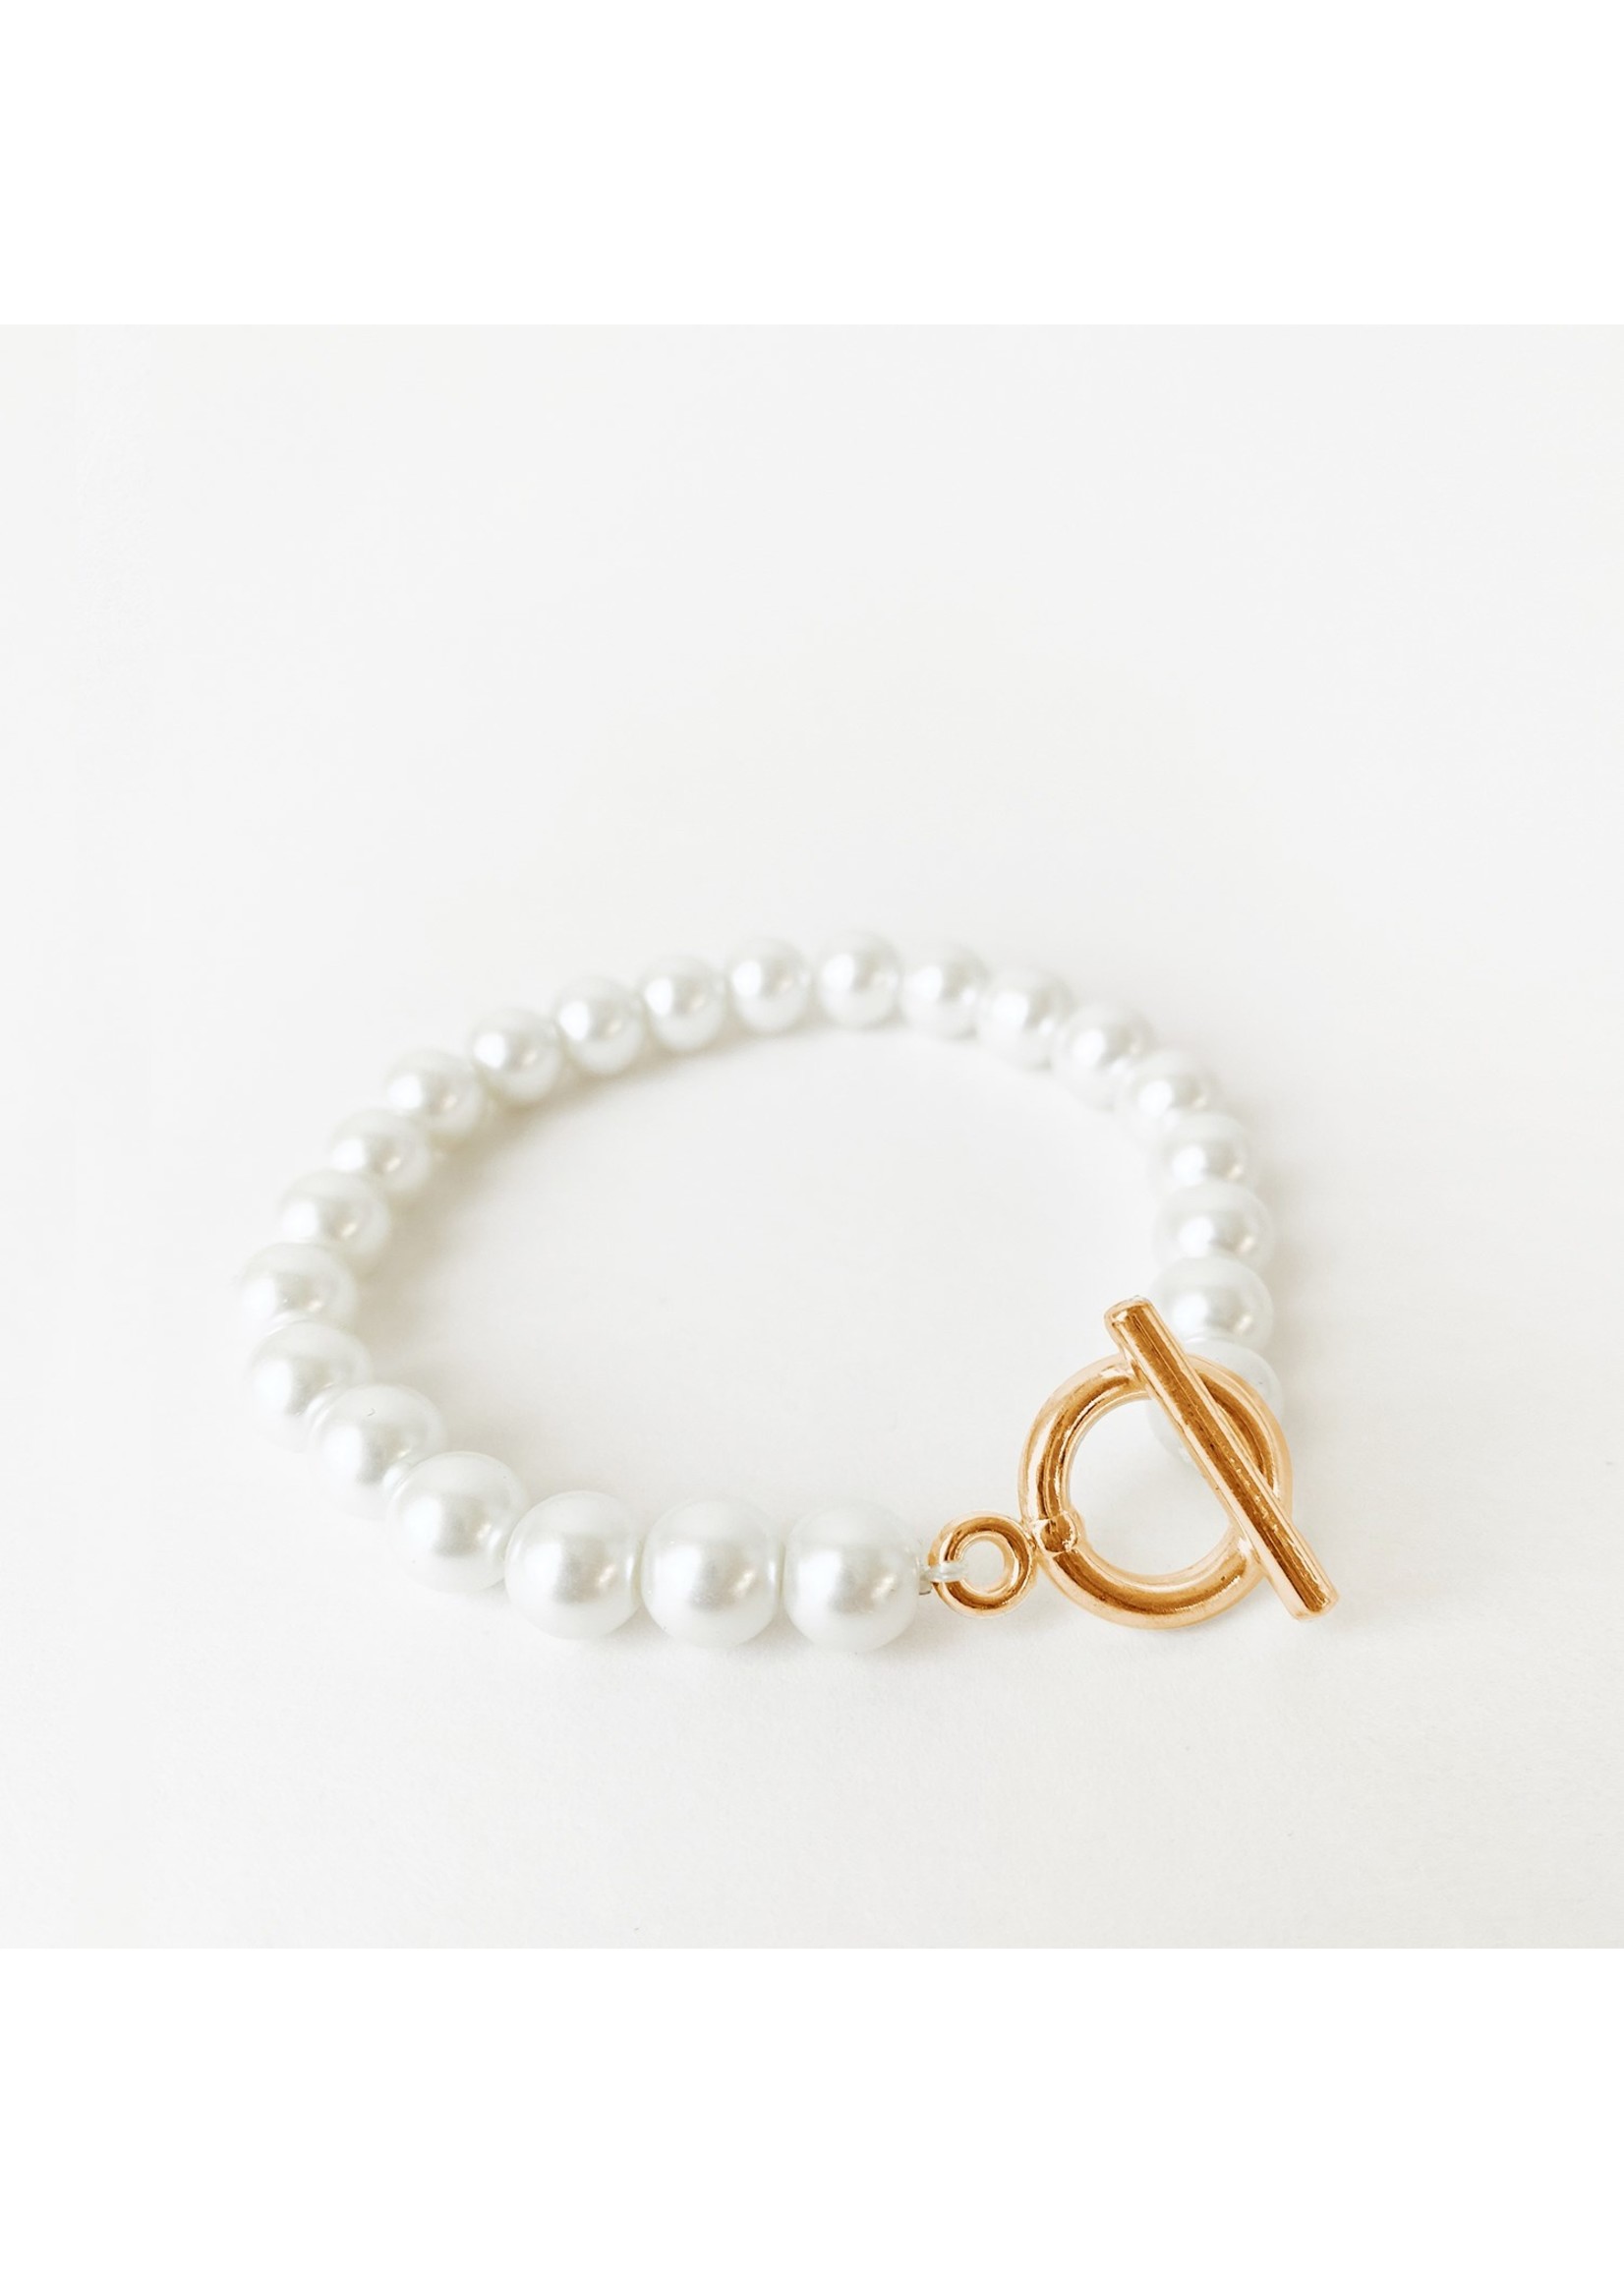 Caracol Gold Faux Pearls Bracelet W/ Toggle Closure